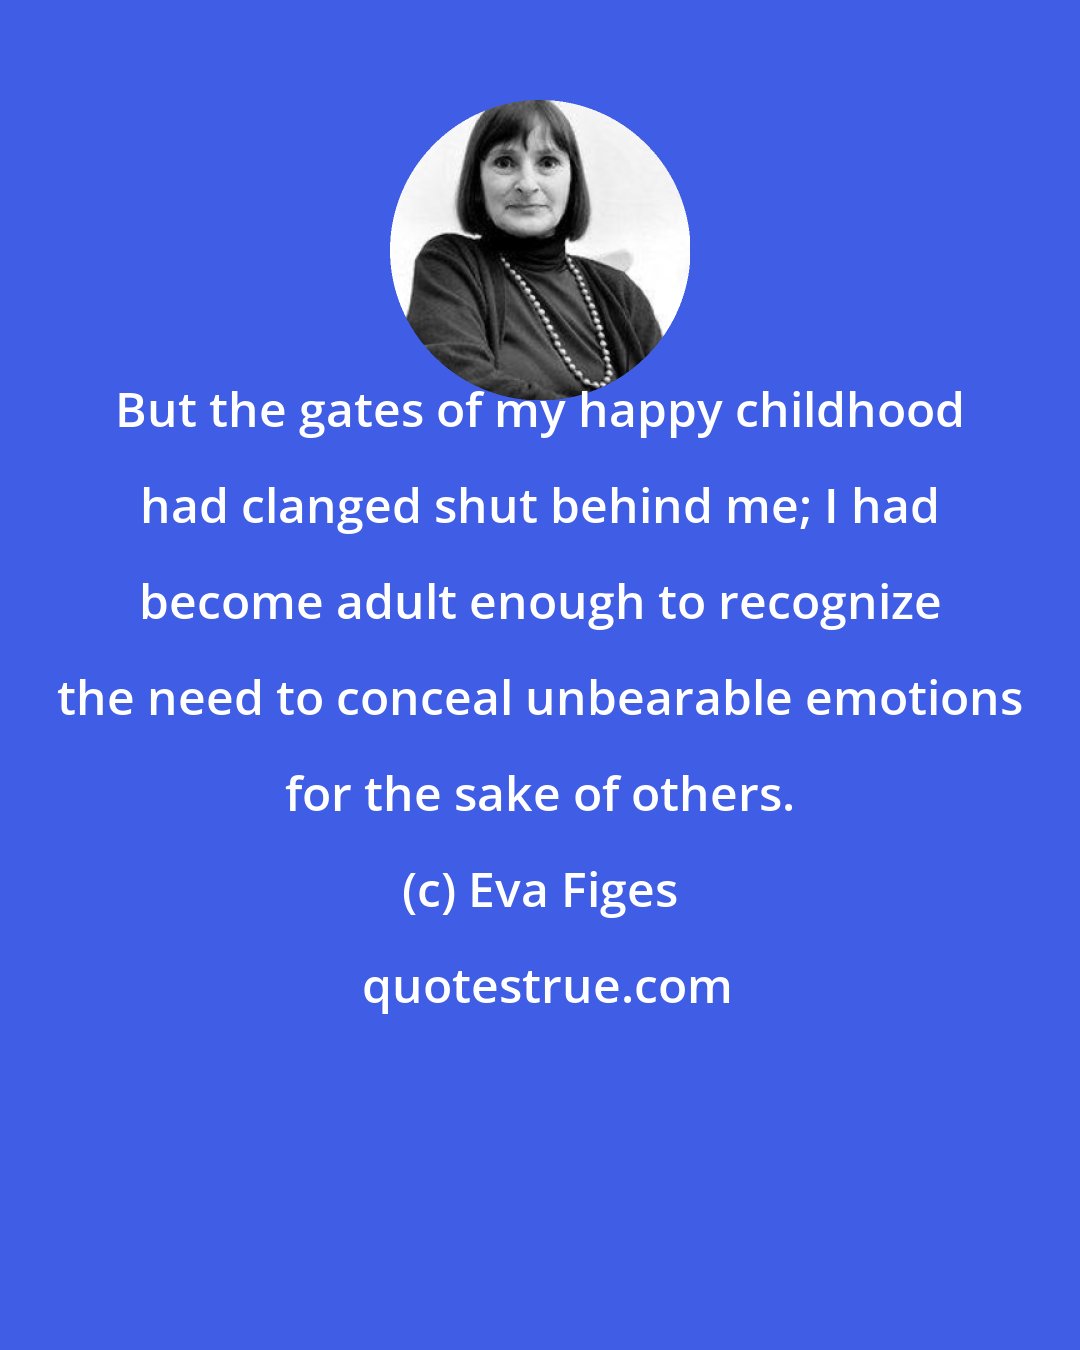 Eva Figes: But the gates of my happy childhood had clanged shut behind me; I had become adult enough to recognize the need to conceal unbearable emotions for the sake of others.